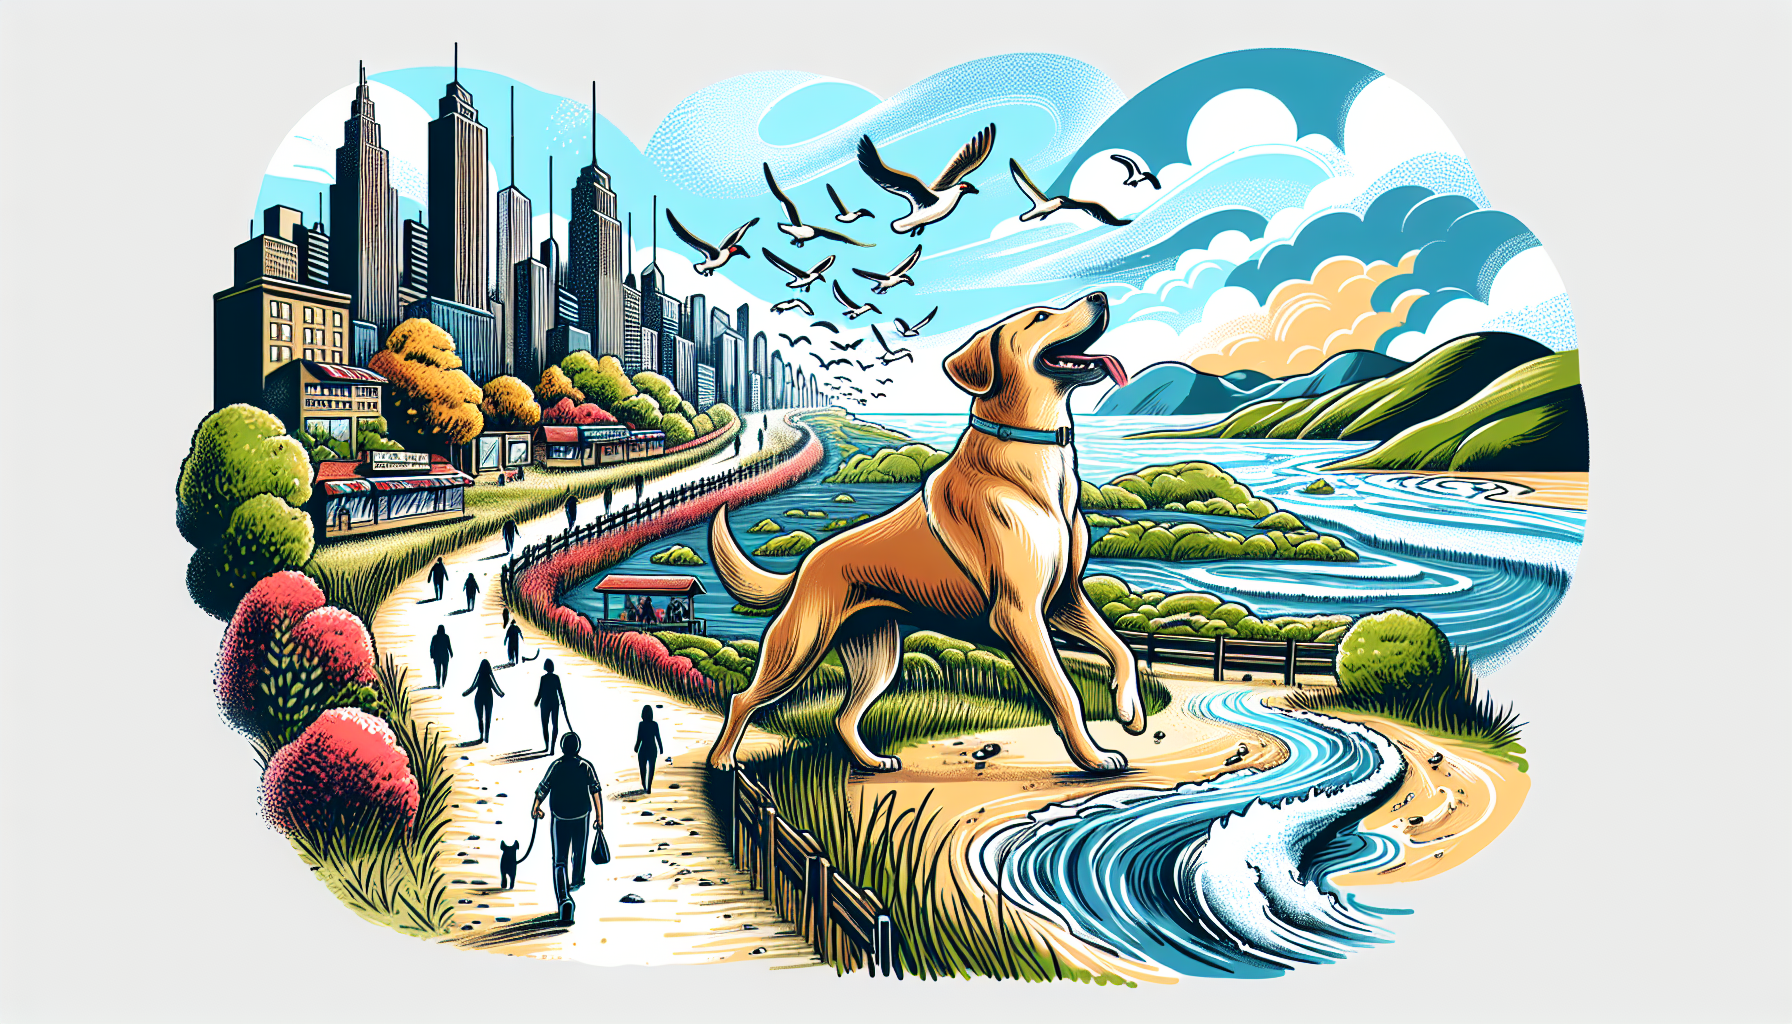 Illustration of a dog walking on a different route with varied scenery